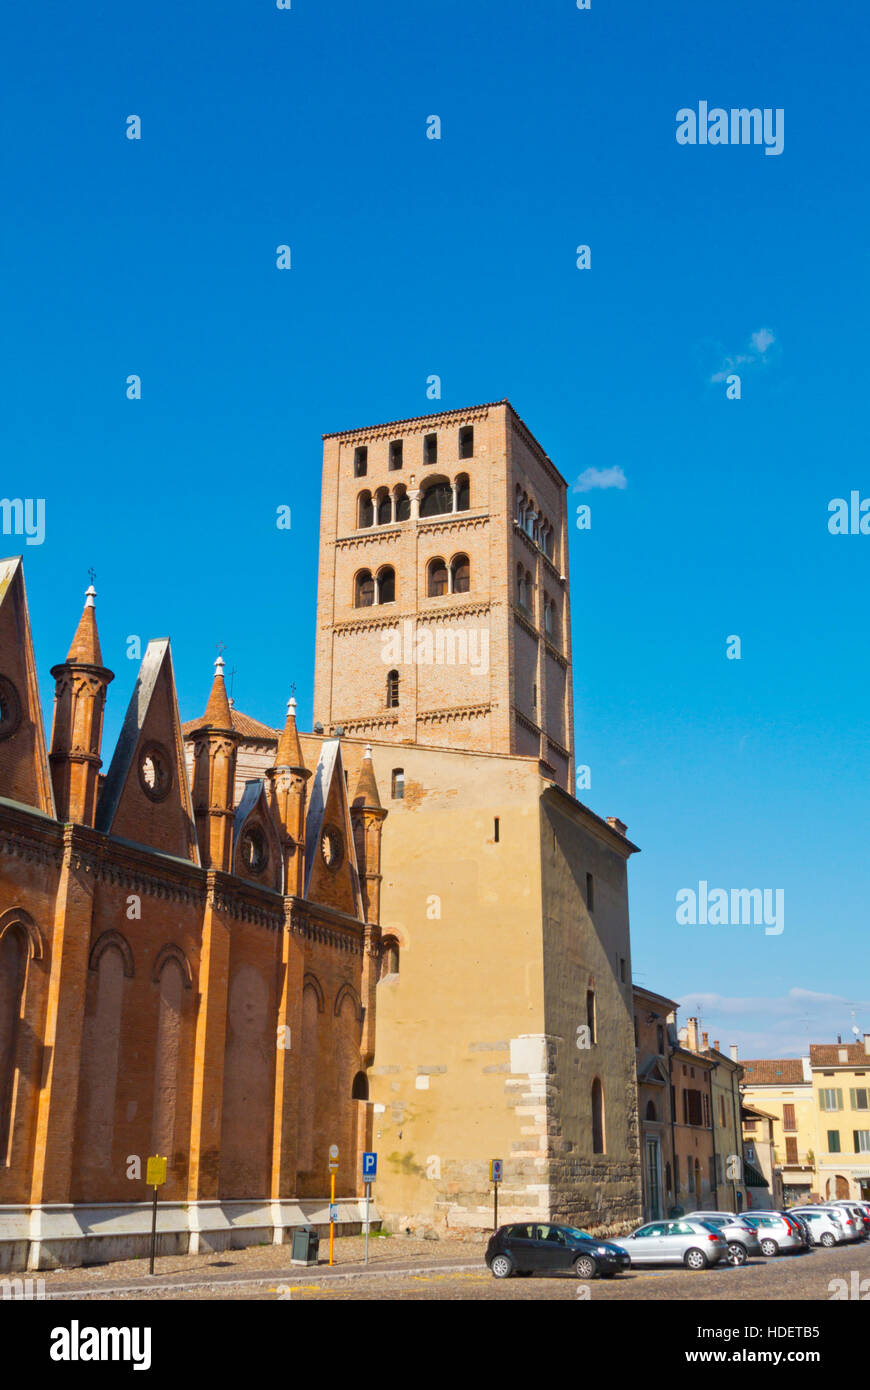 Campanil, bell tower, Duomo, cathedral church, Piazza Sordello, Mantua, Lombardy, Italy Stock Photo